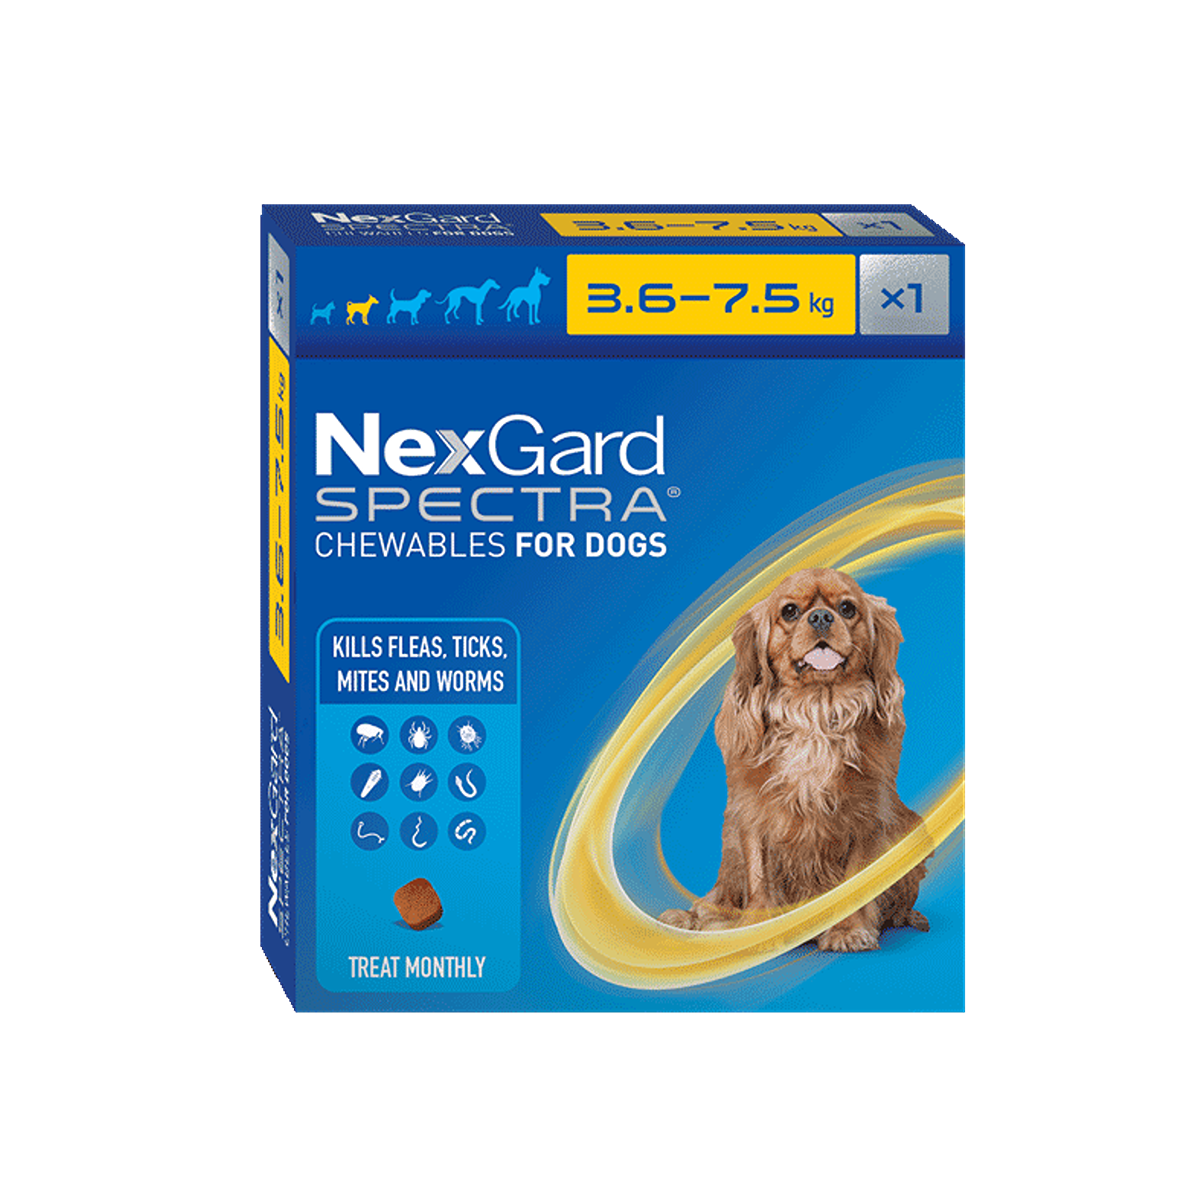 NexGard Spectra Chewables for Small Dogs 3.6-7.5kg